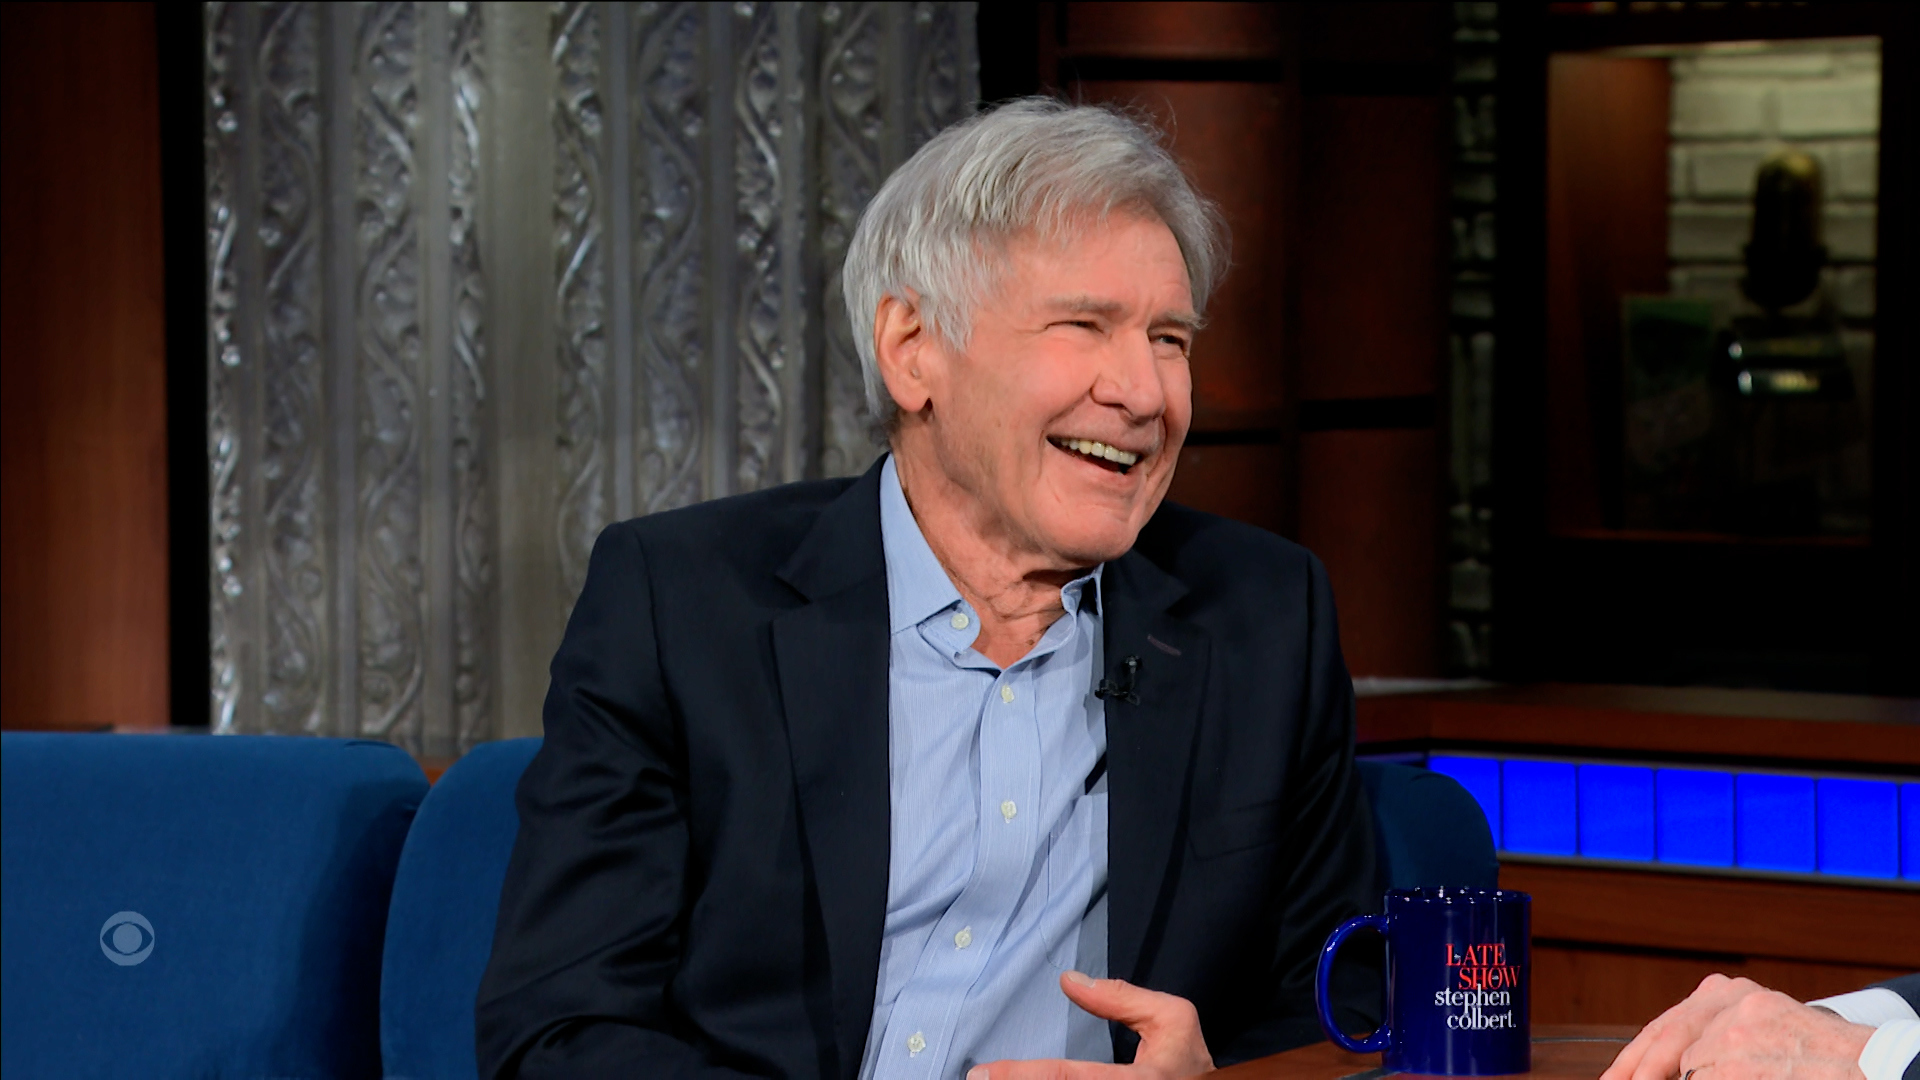 Harrison Ford on Wednesday night's episode of 'The Late Show with Stephen Colbert'